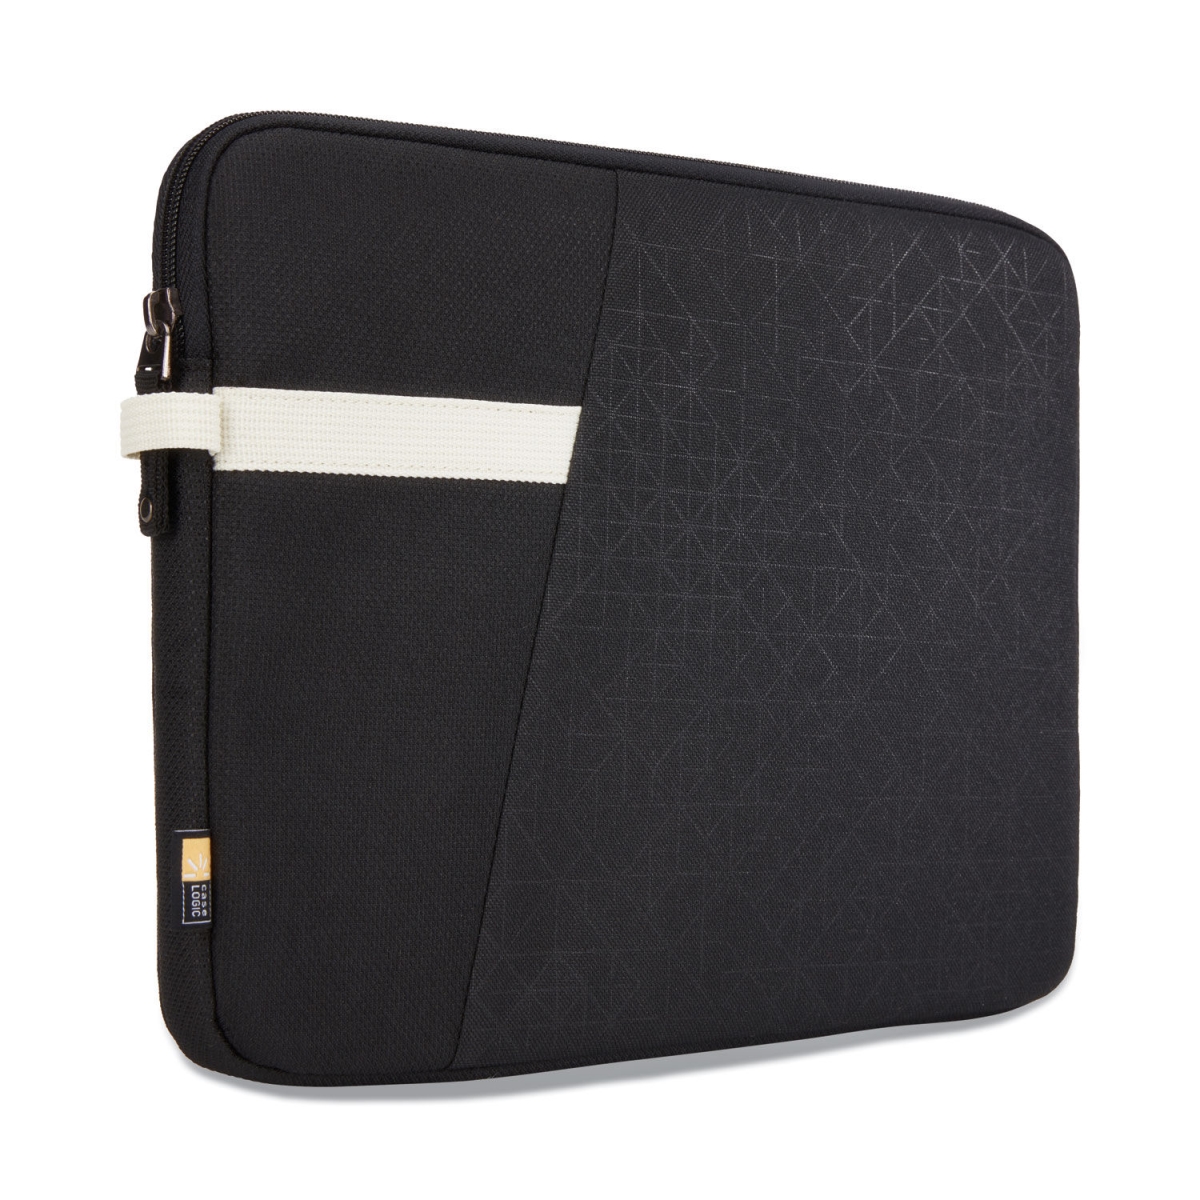 Picture of Caselogic CLG3204389 Laptop Sleeve, Black - 11 in.